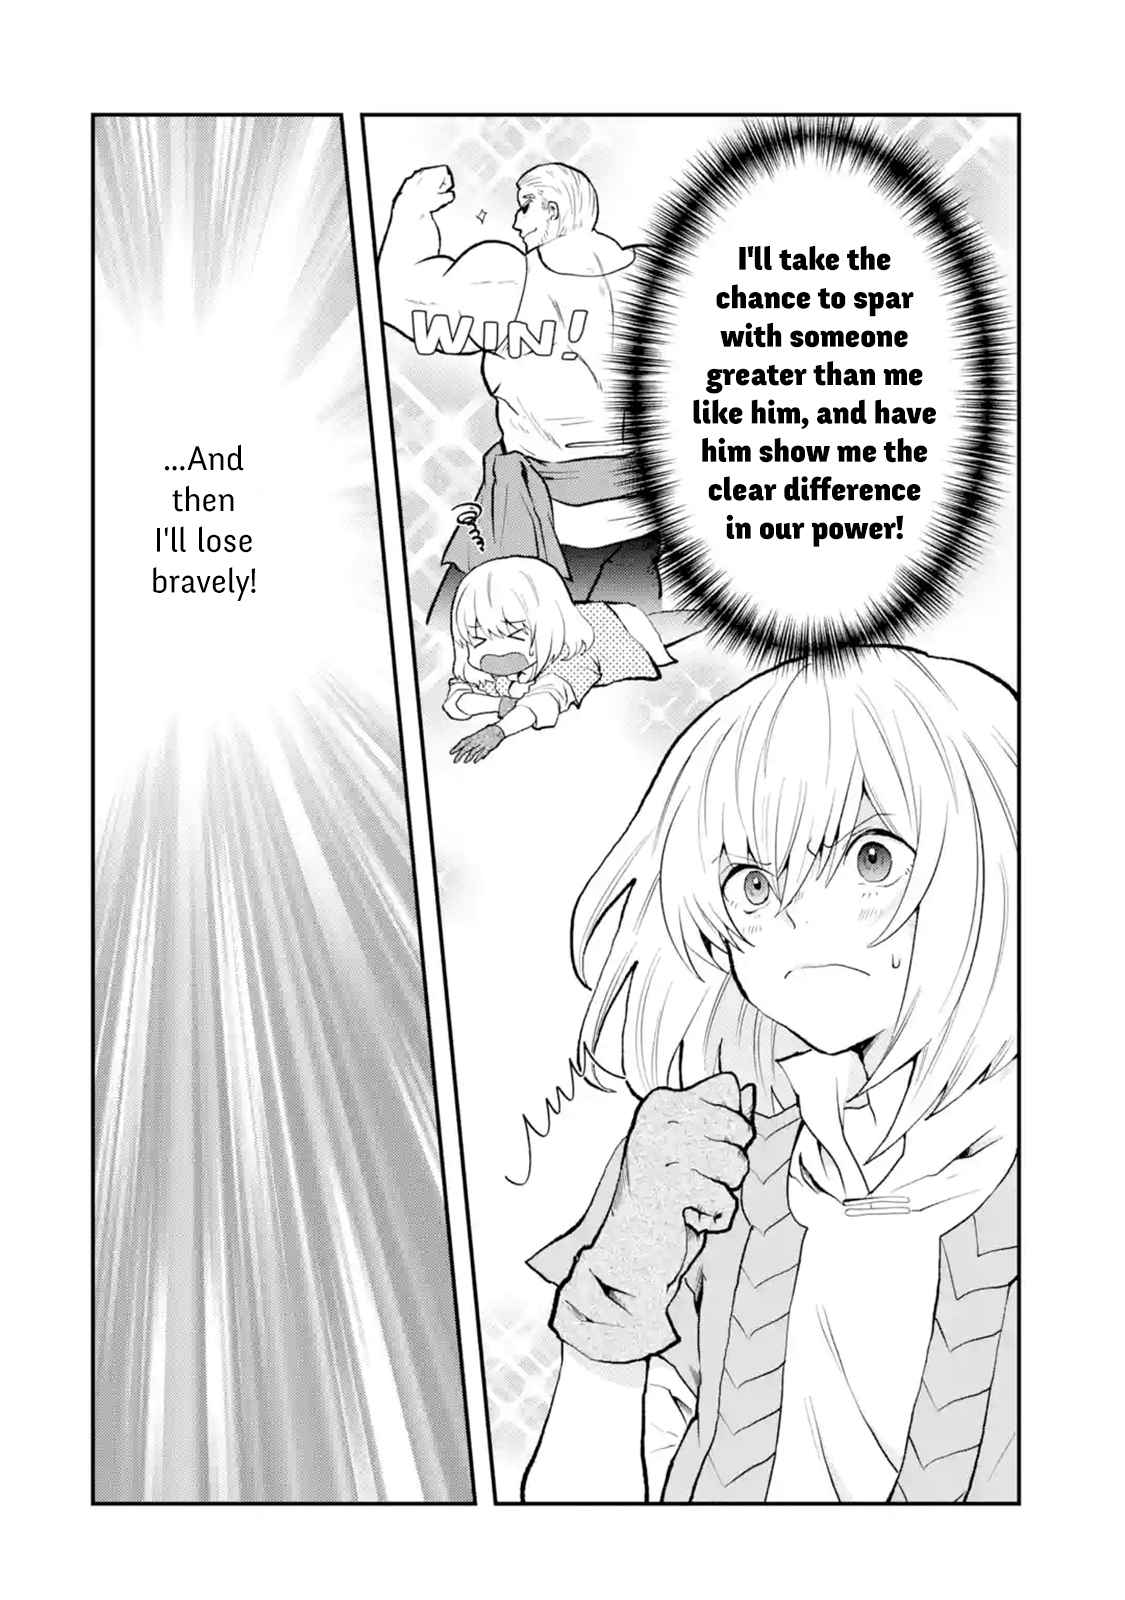 That Inferior Knight, Lv. 999 Ch. 3.5 That Boy Will Undertake the Chivalric Order Enrollment Exam (5)